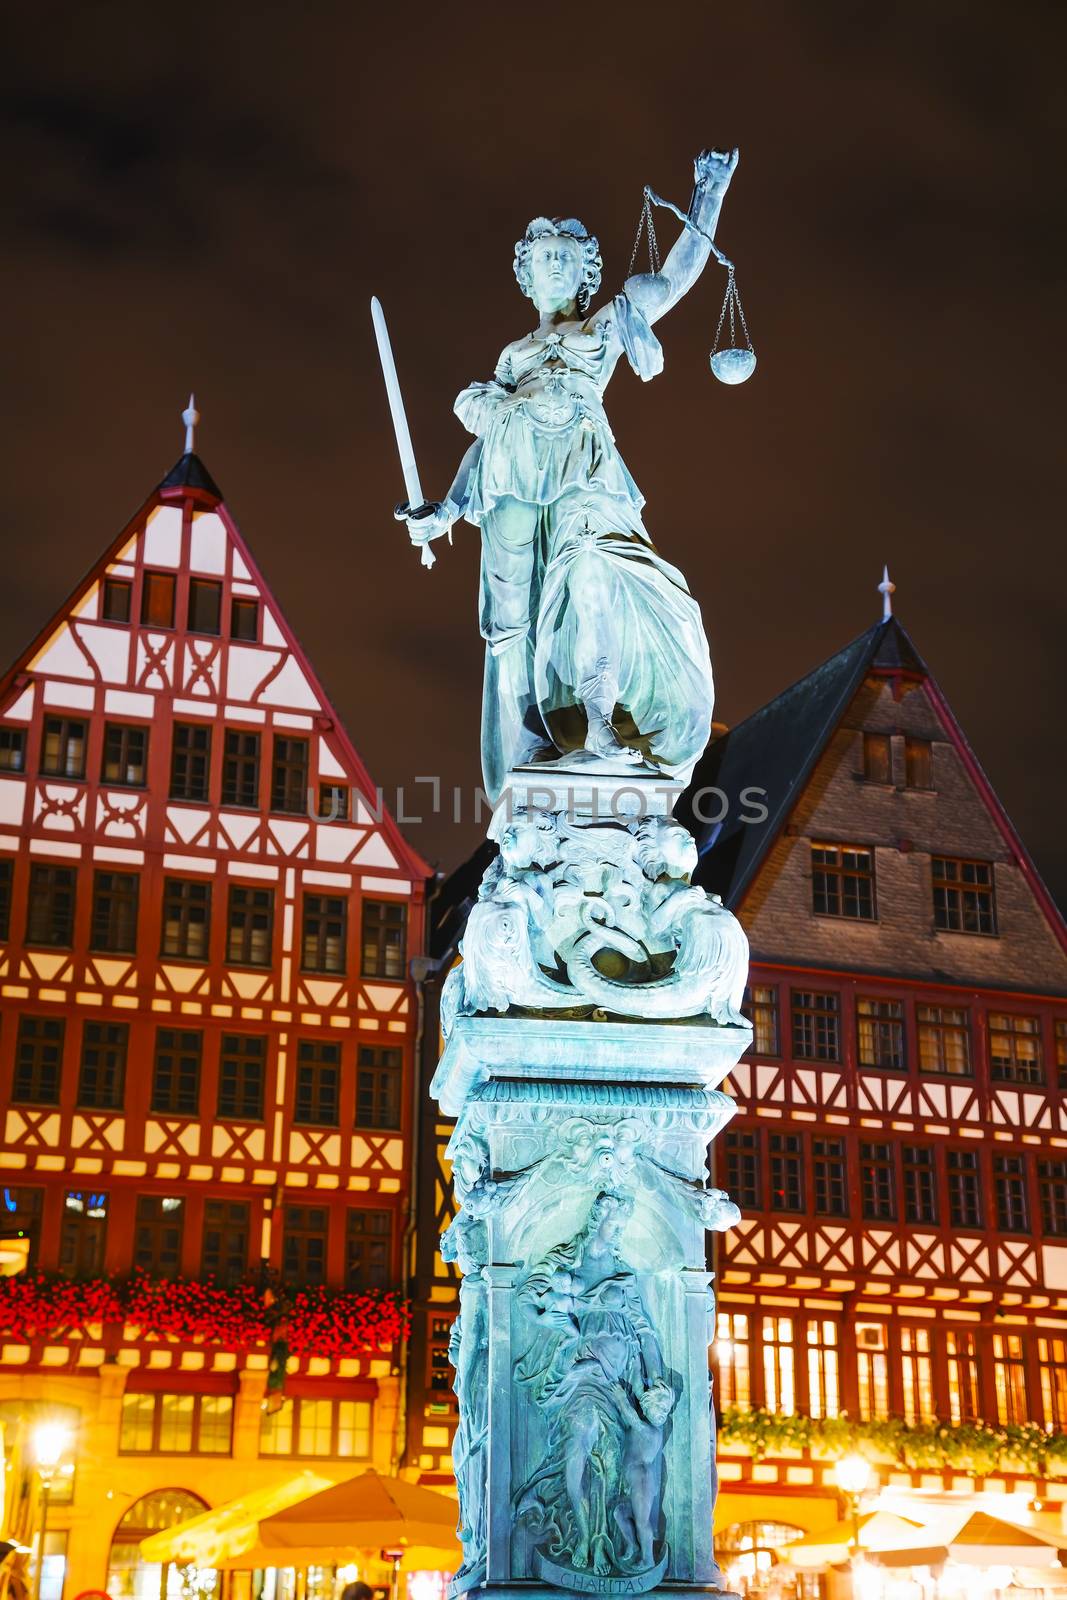 Lady Justice sculpture at the Old town in Frankfurt am Maine, Germany